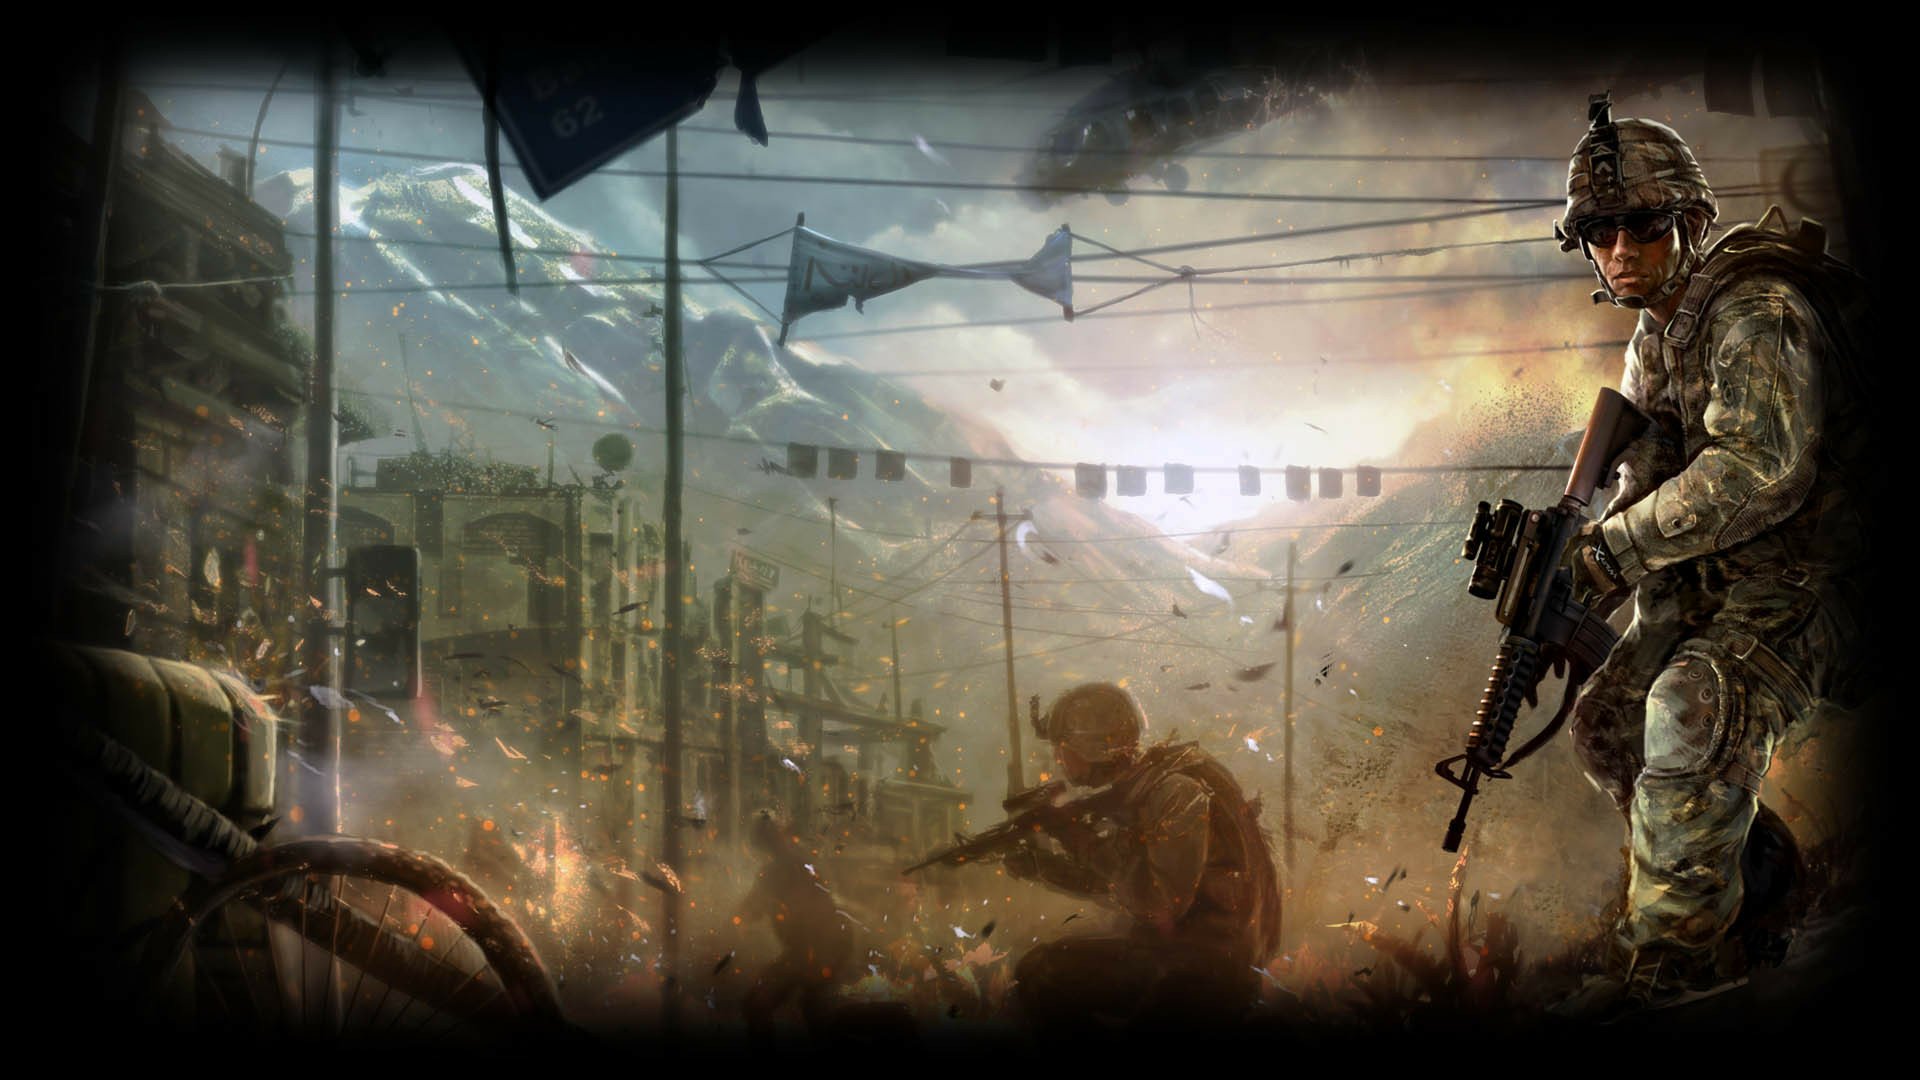 Heavy Fire Afghanistan Free Download, shooting games download in